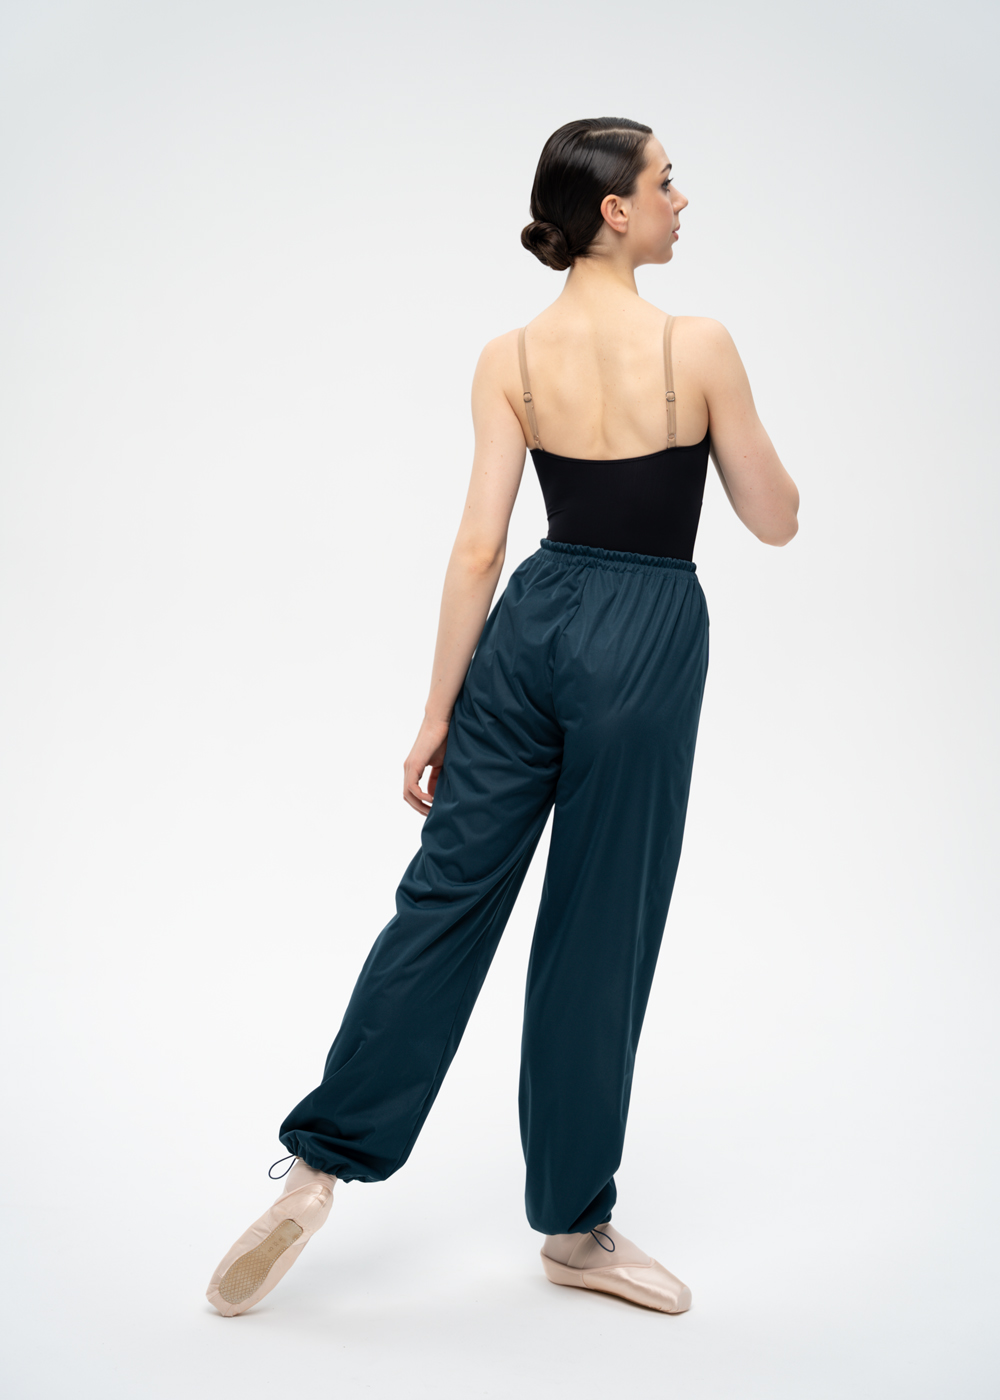 BLISS-1, Lady's warm-up pants (0405N)